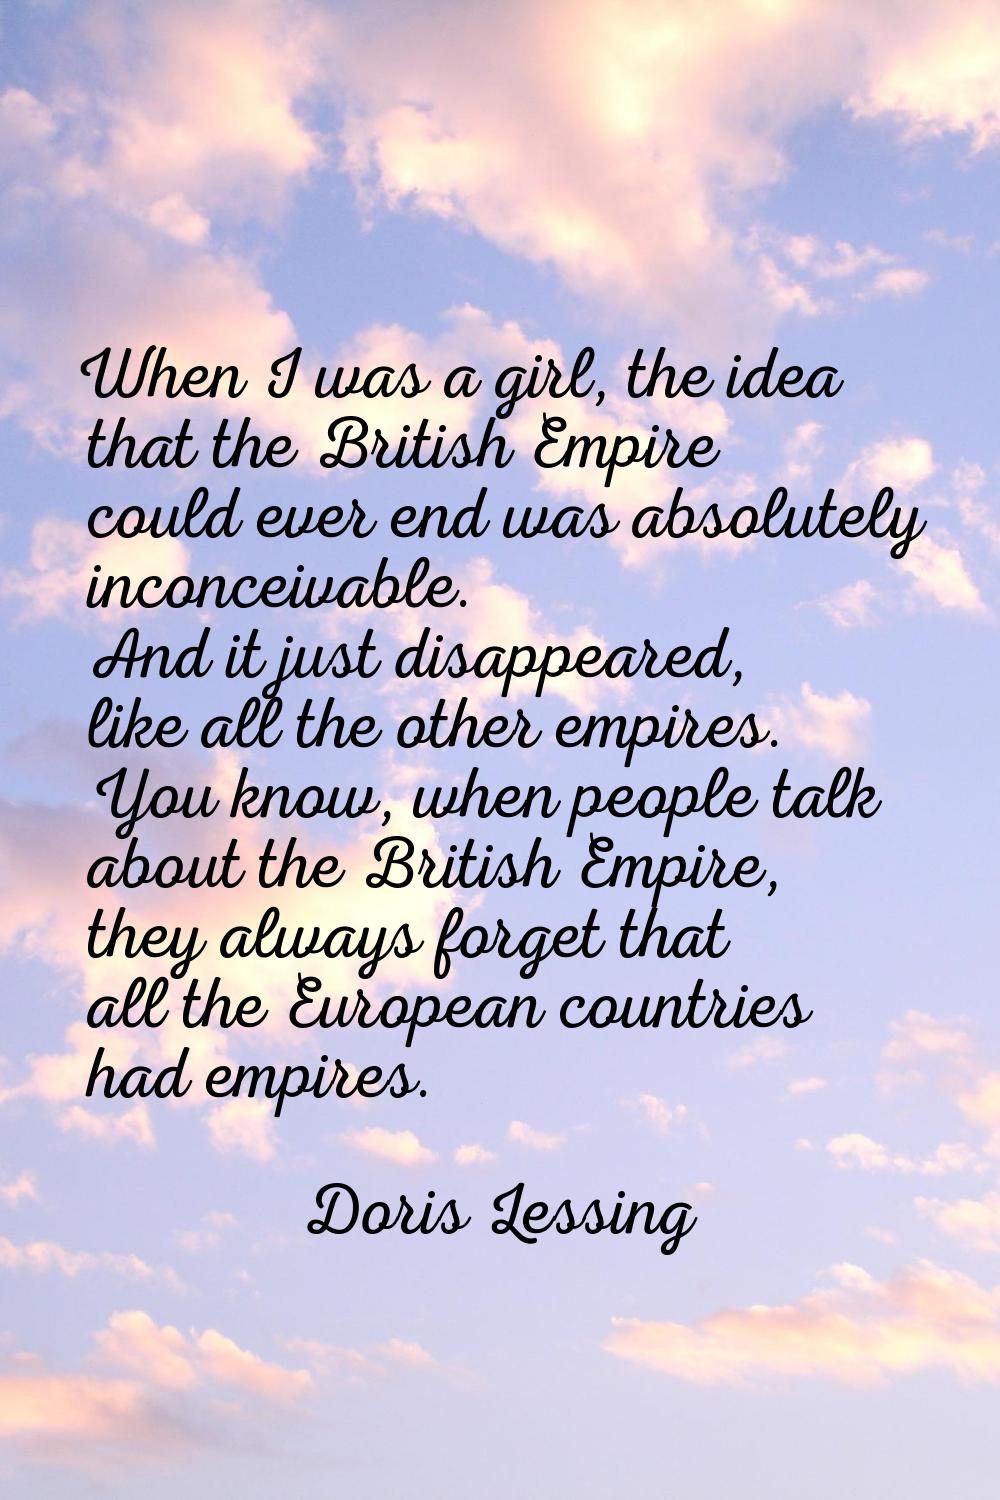 When I was a girl, the idea that the British Empire could ever end was absolutely inconceivable. An